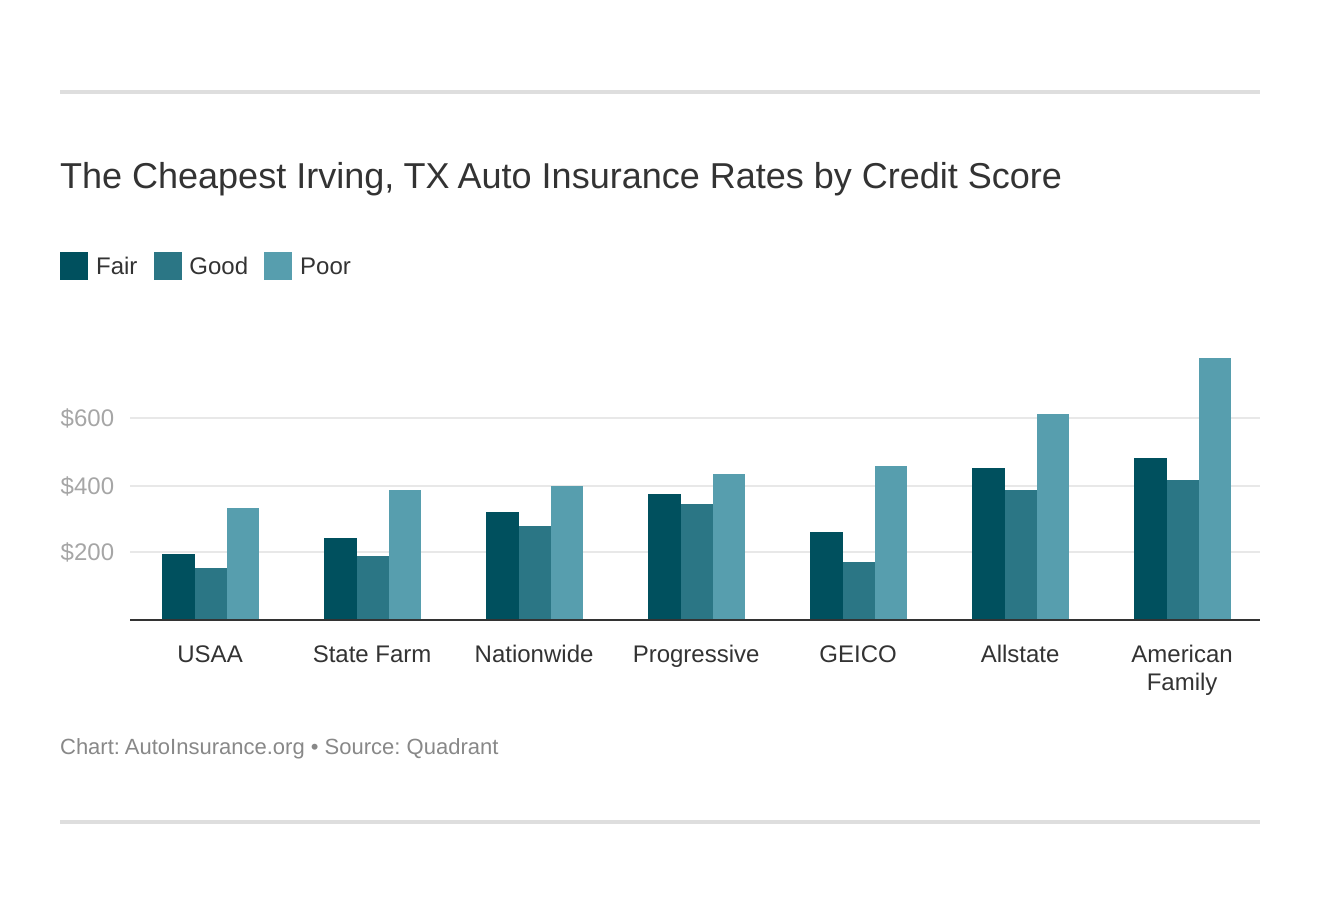 The Cheapest Irving, TX Auto Insurance Rates by Credit Score